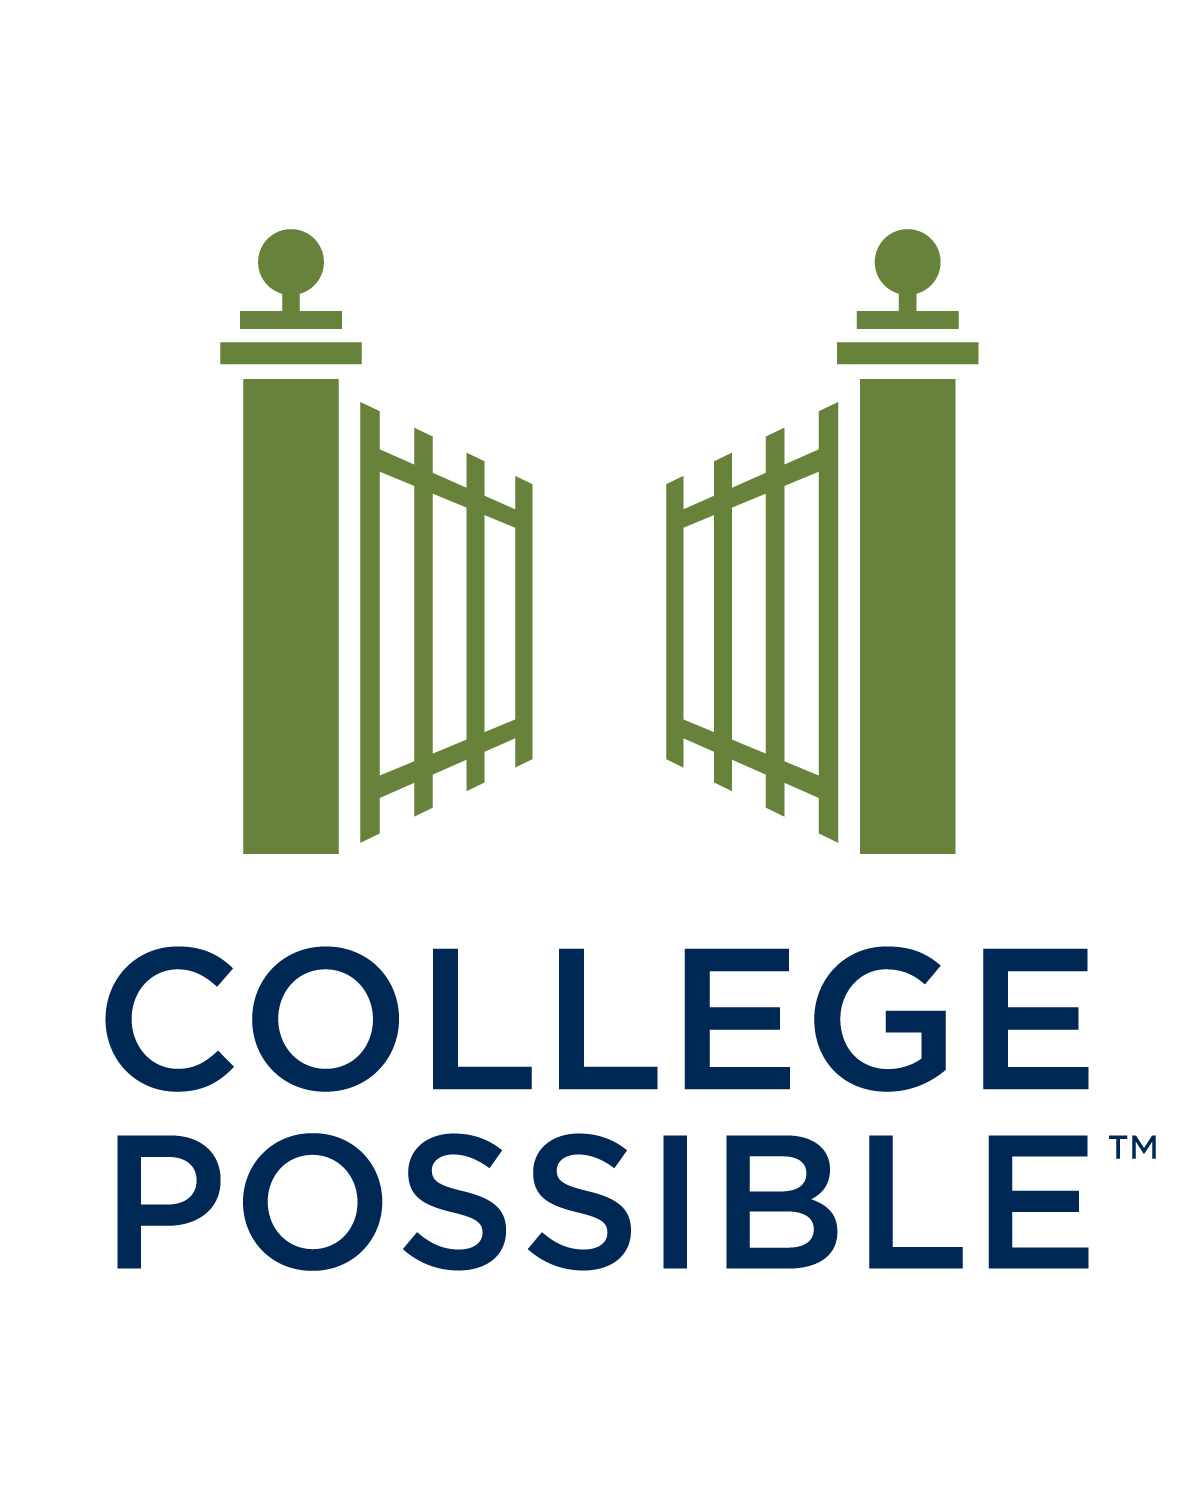 College Possible logo